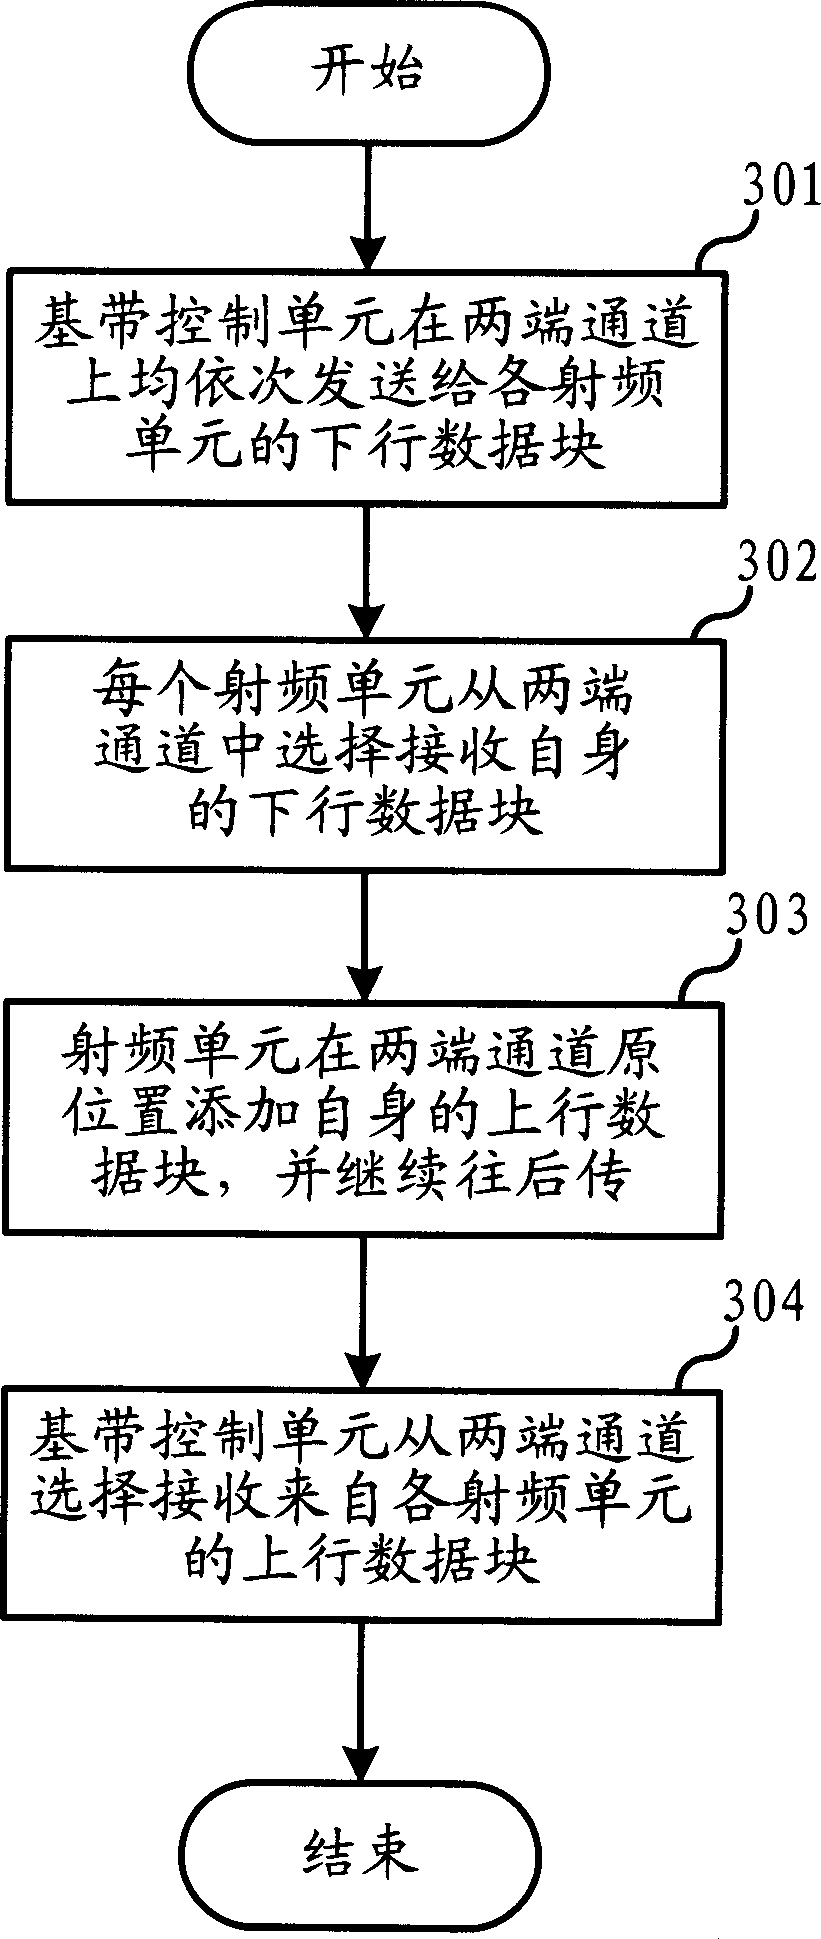 Mobile communication base station system and its backpu protecting method